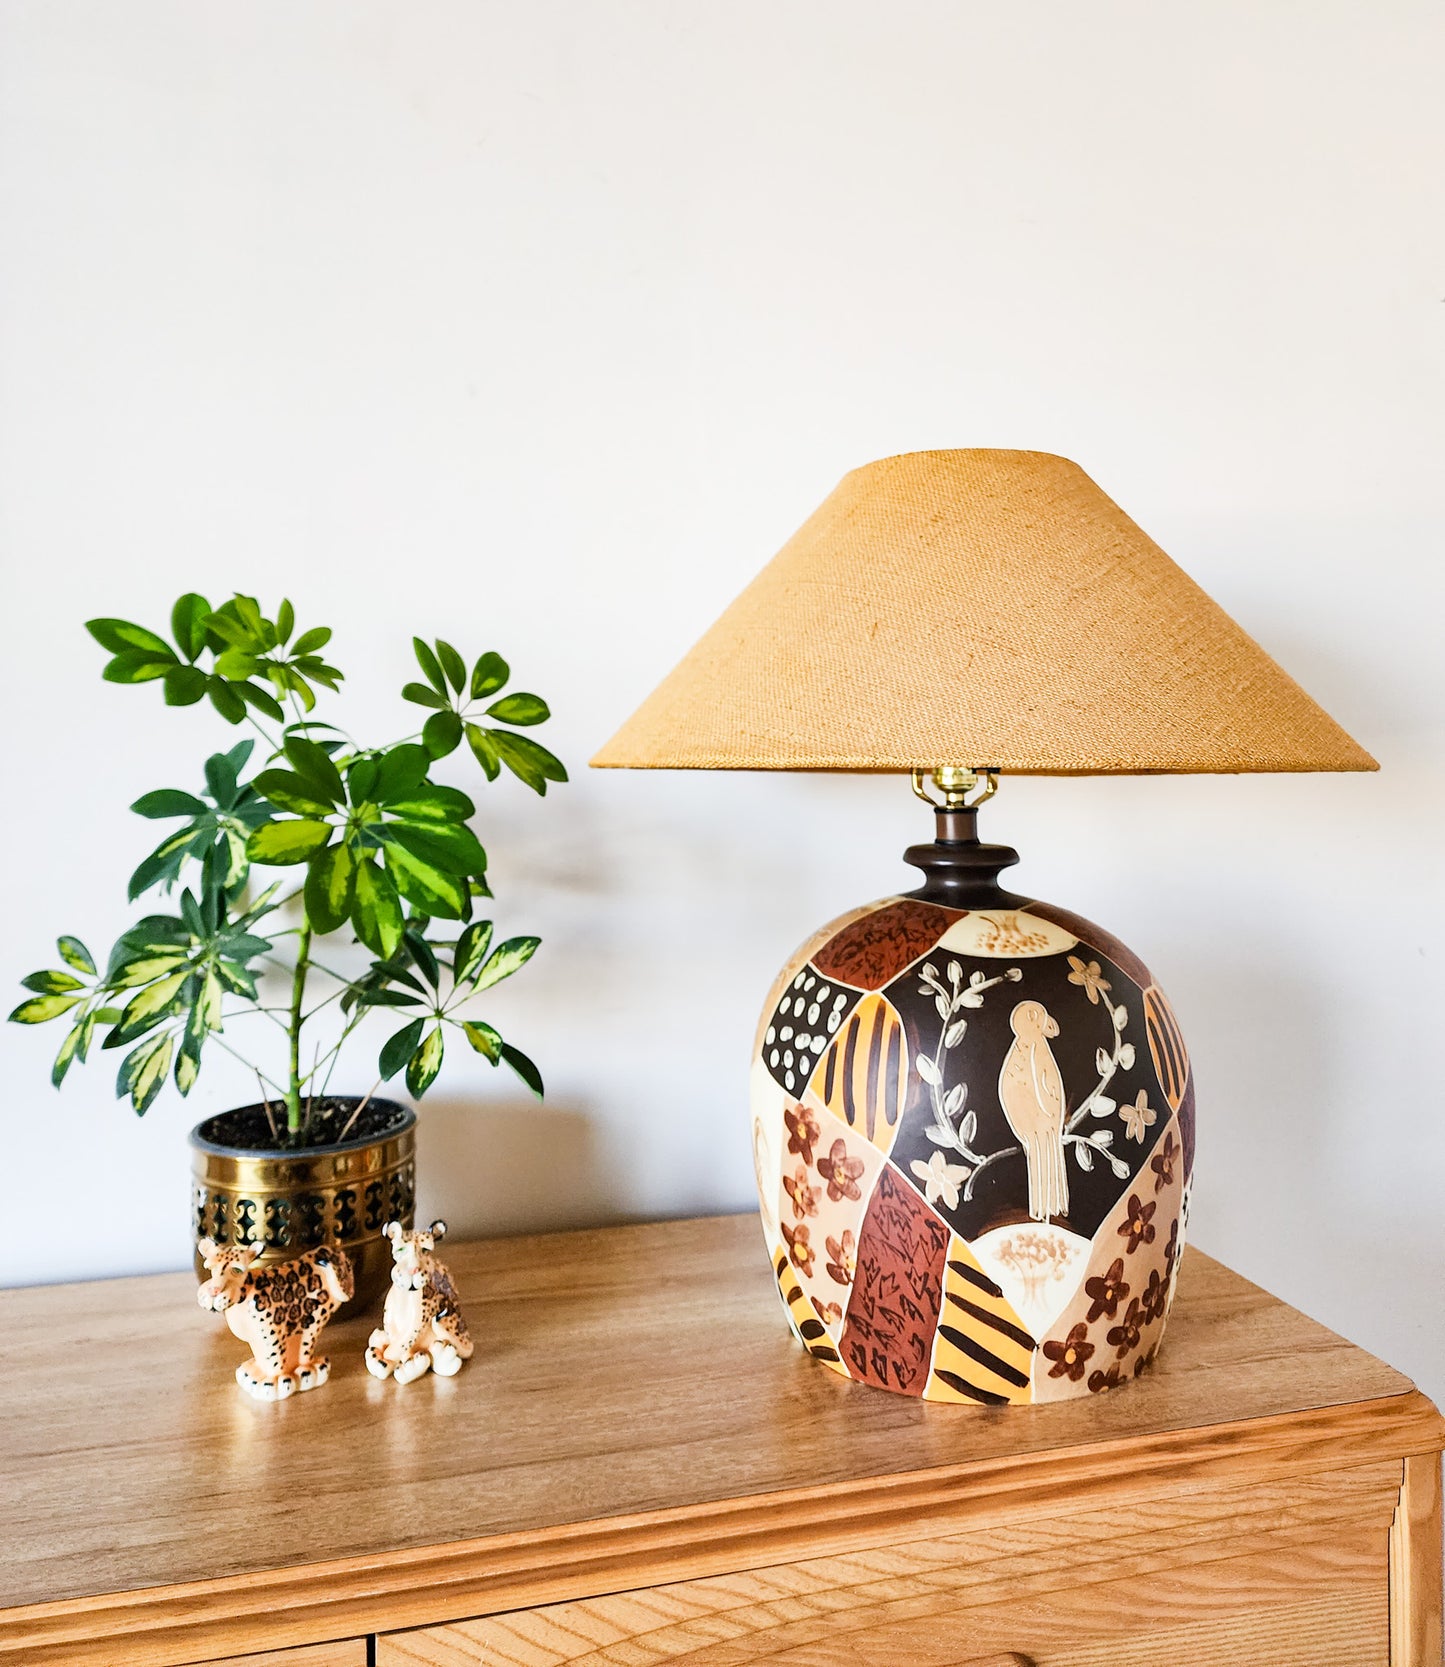 Vintage Hand Painted Mid Century Table Lamp - Reclaimed Mt. Goods